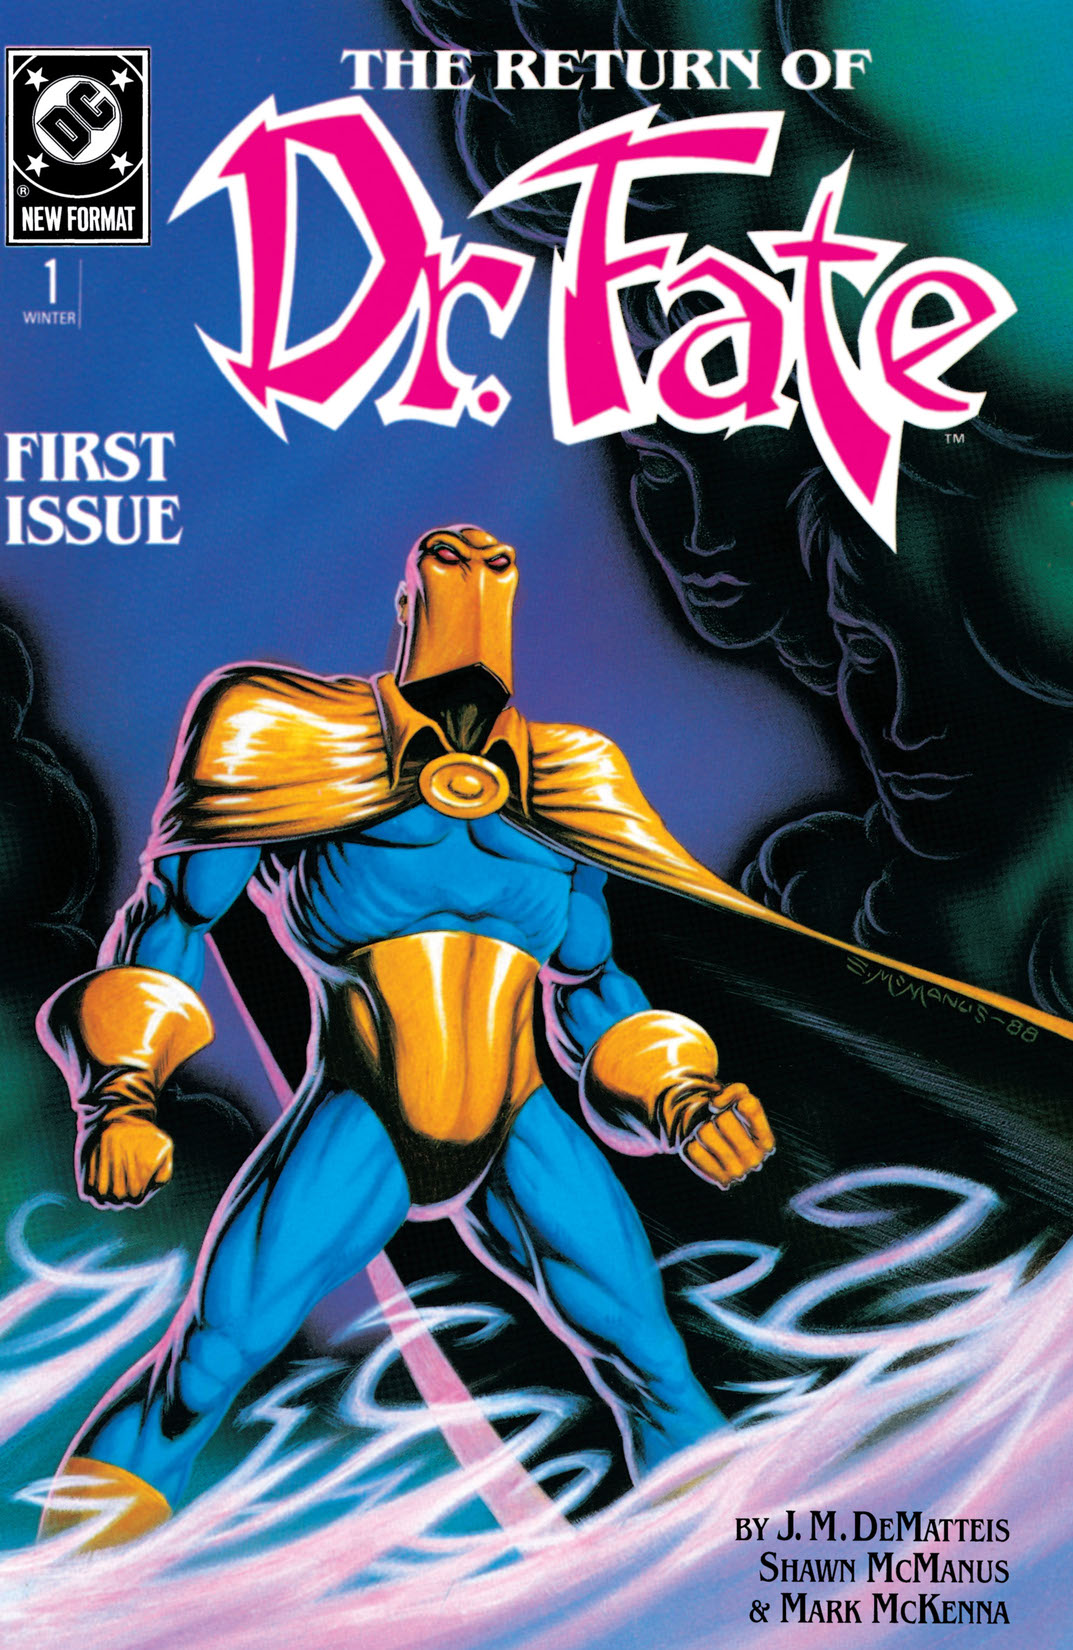 Dr. Fate (1988-) #1 preview images